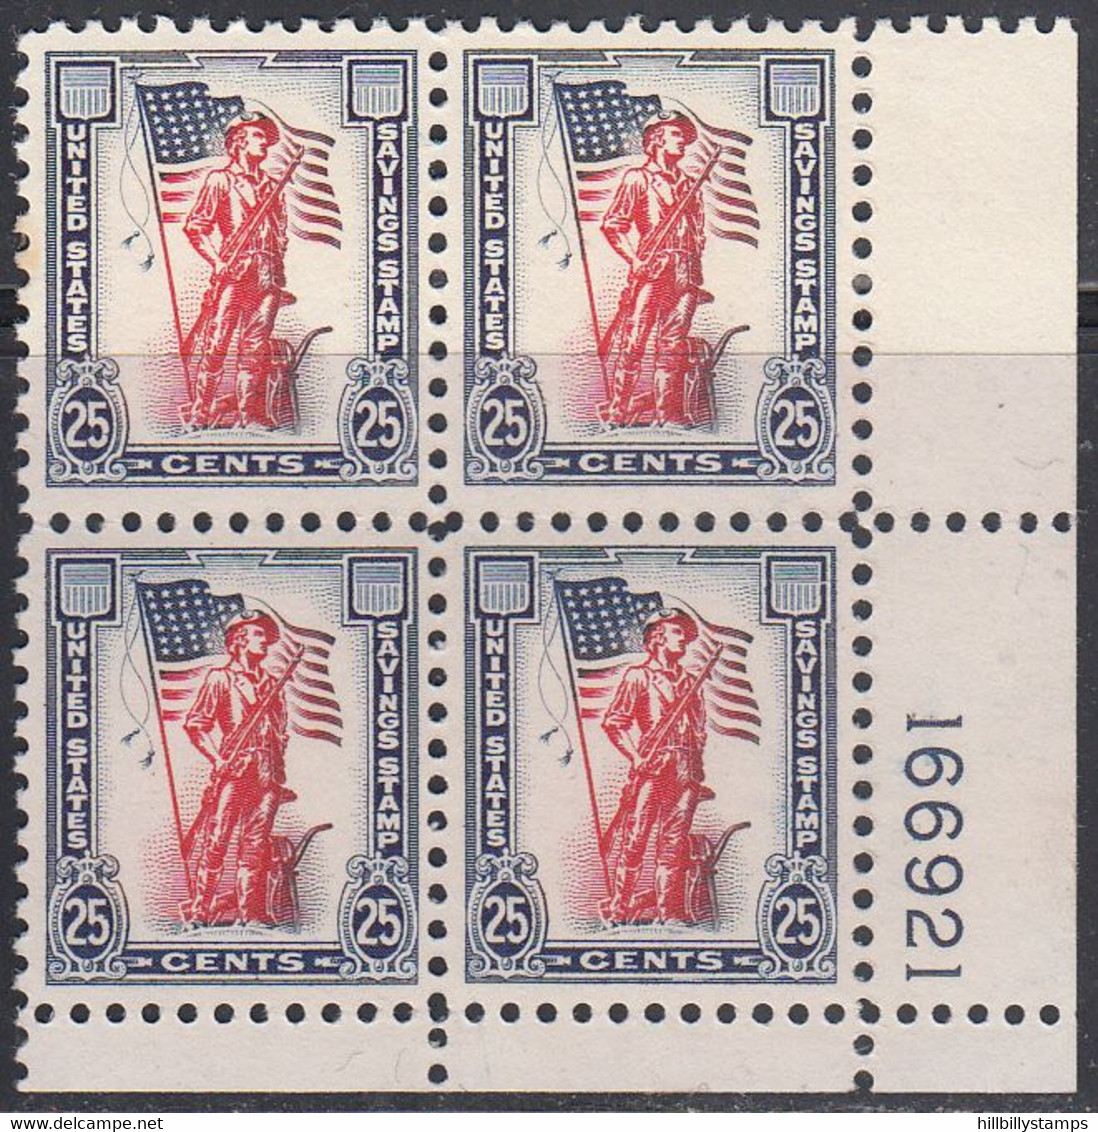 UNITED STATES     SCOTT NO  S6   MNH    YEAR  1954  PLATE NUMBER BLOCK - Sin Clasificación